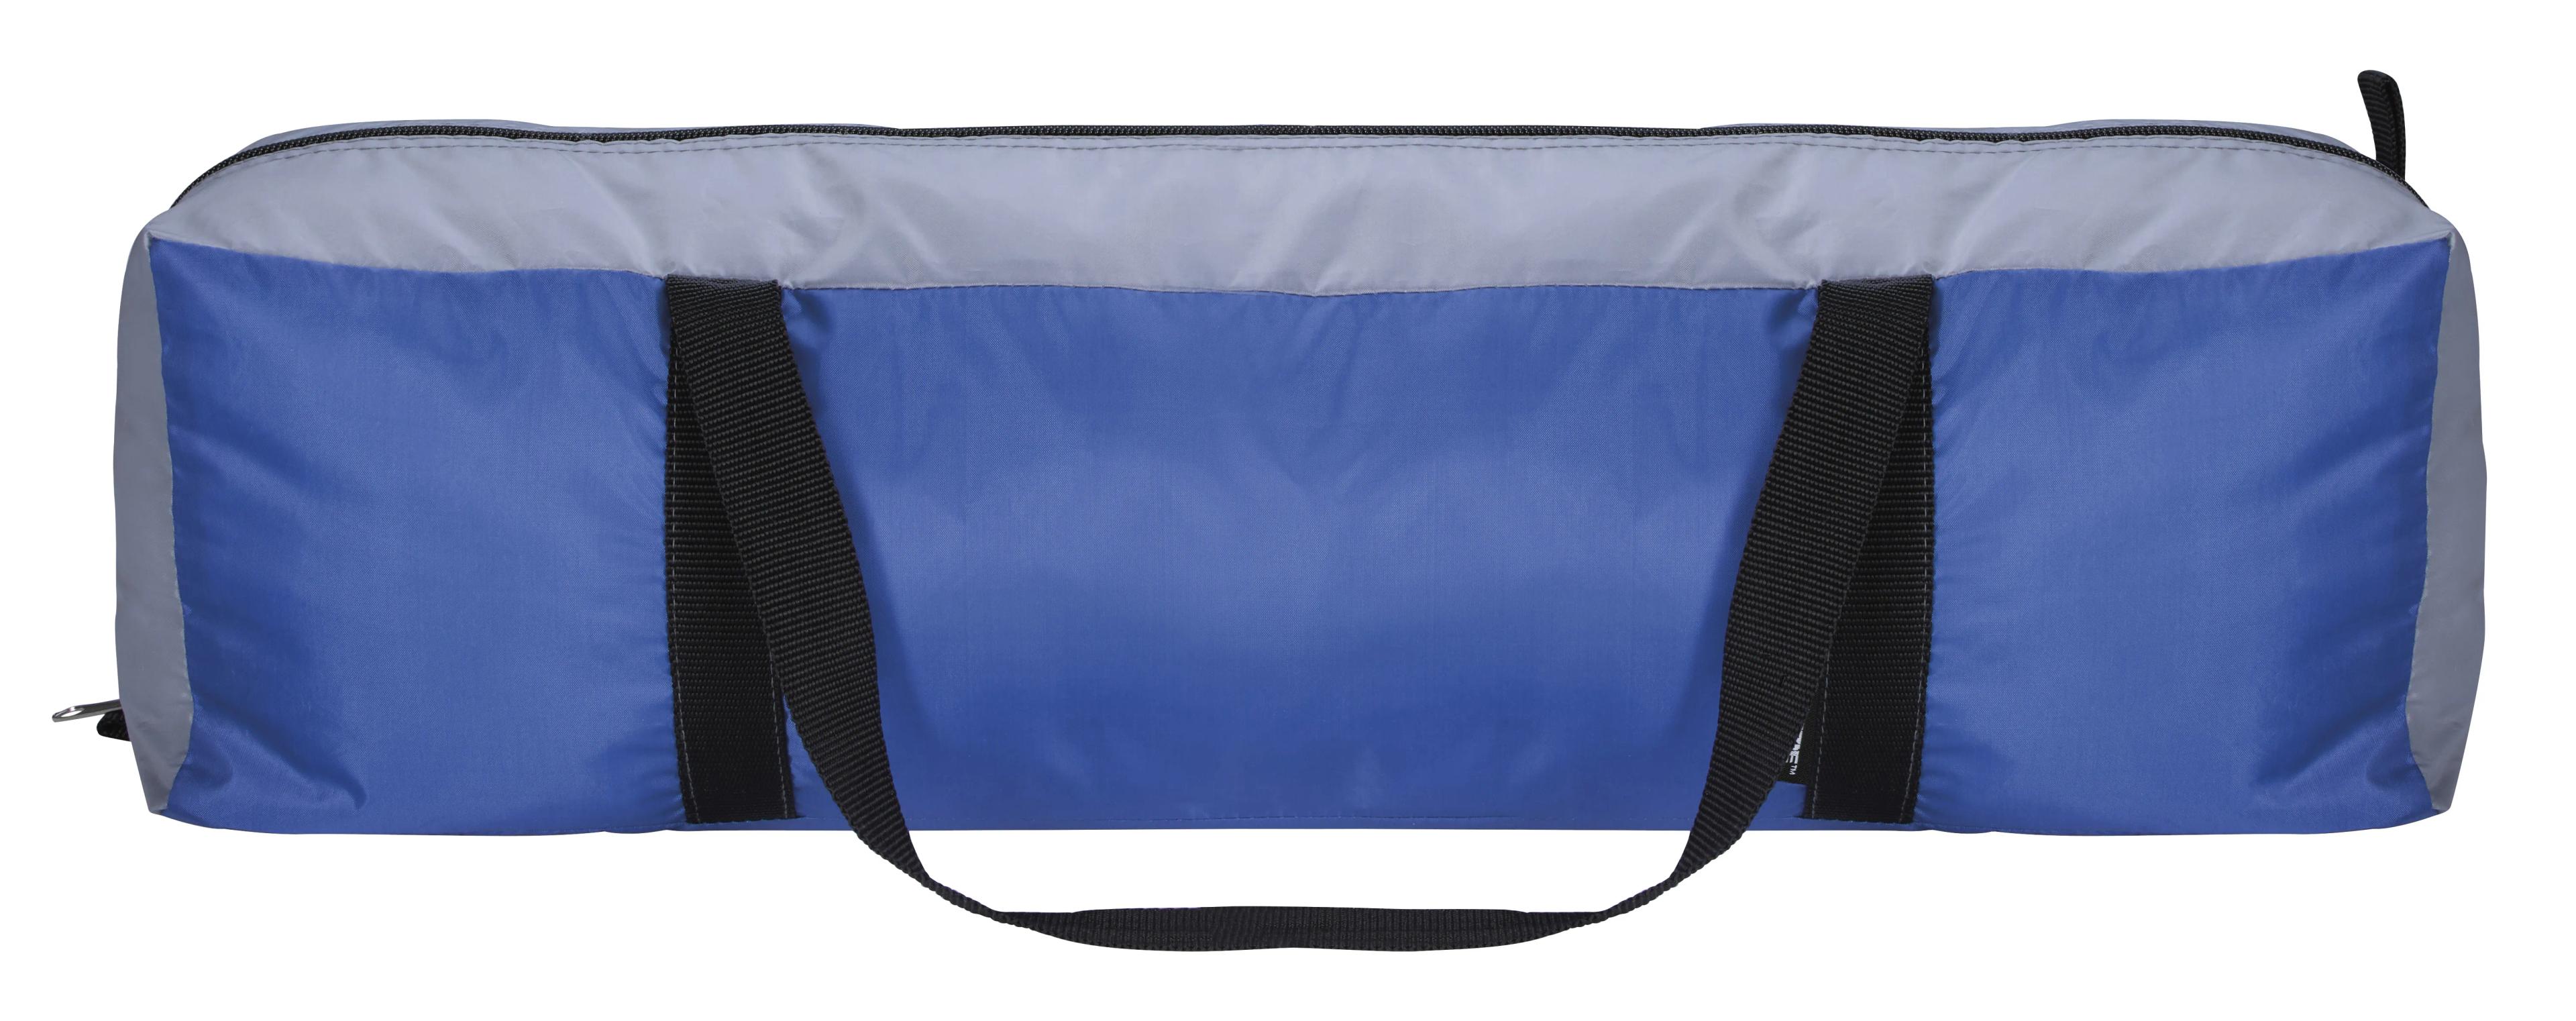 Koozie® Camp 2 Person Tent